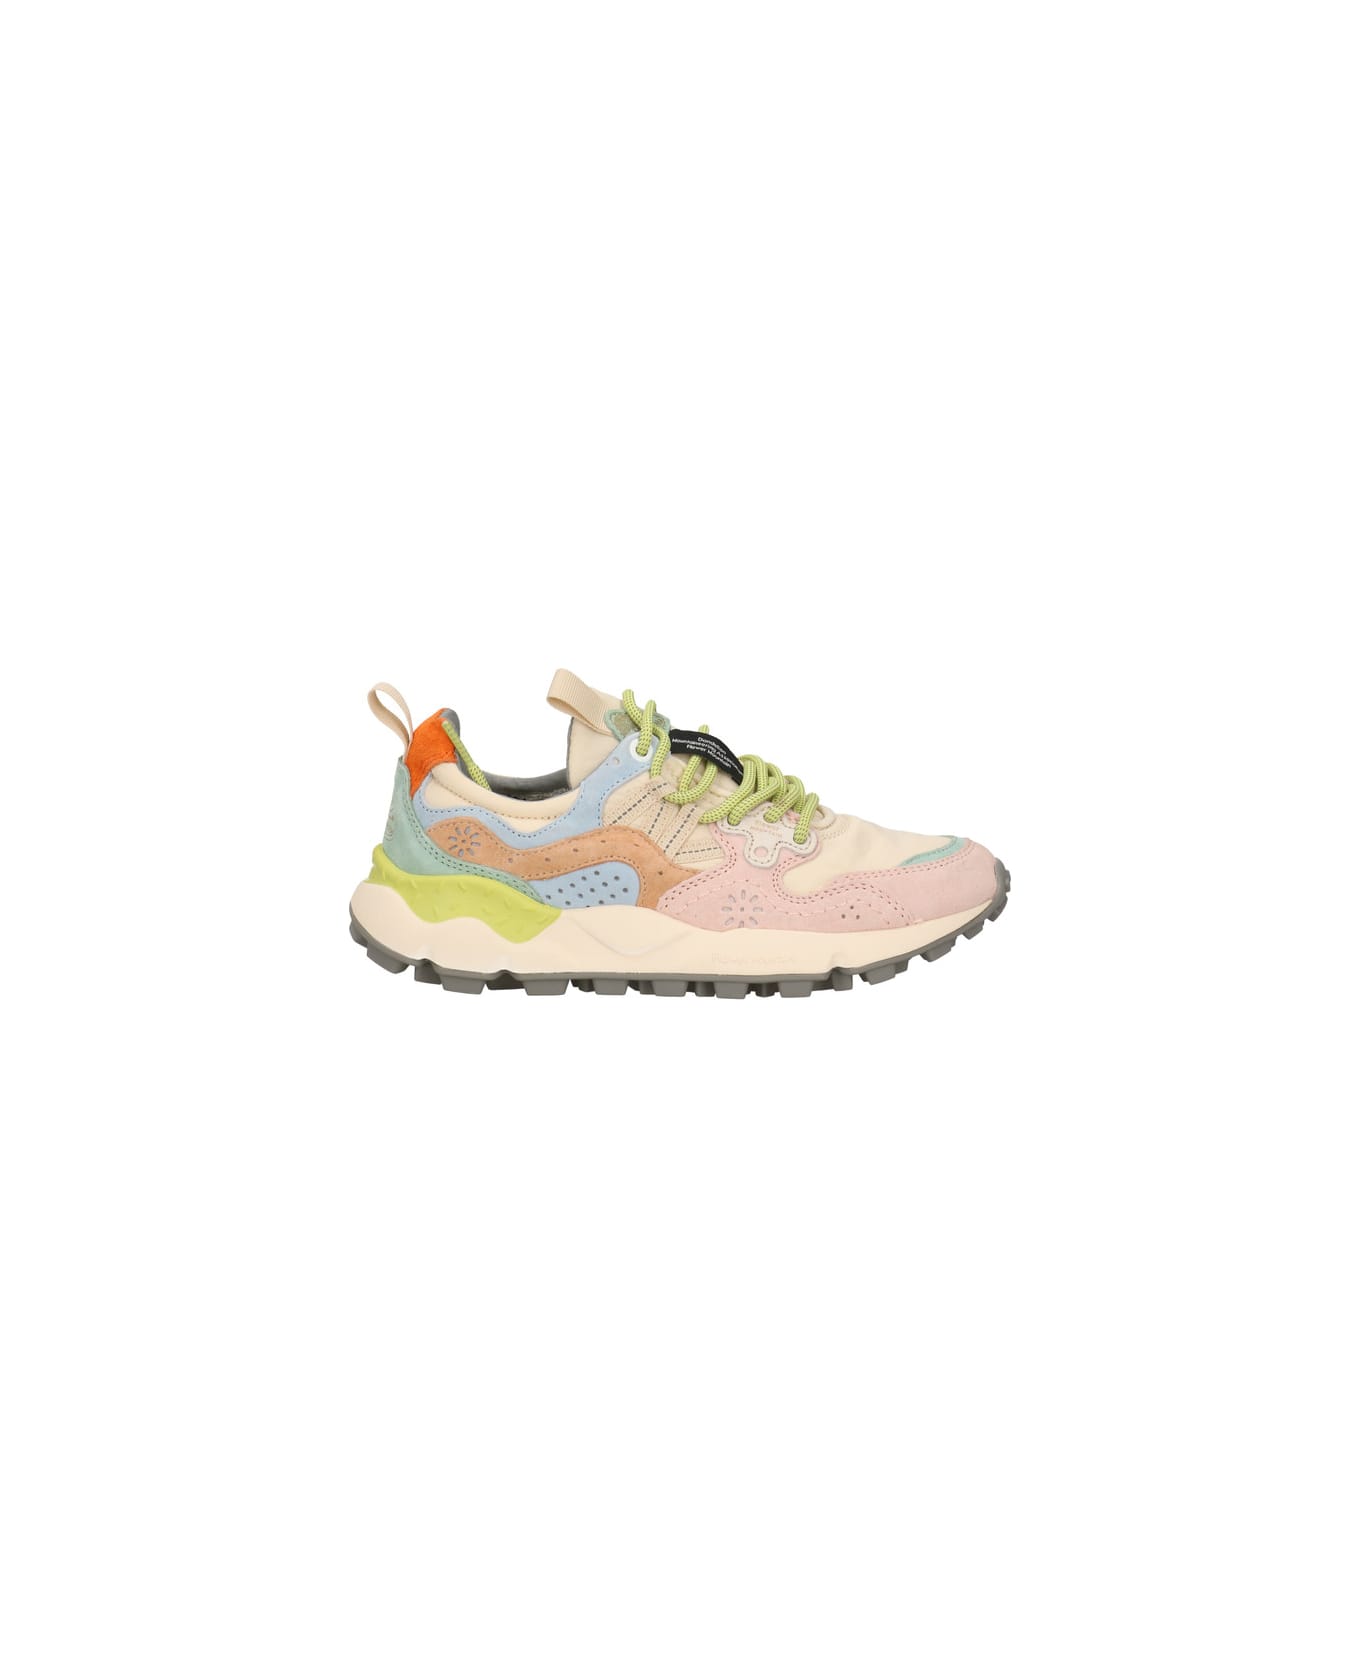 Flower Mountain Yamano3 Sneakers - Multicolor